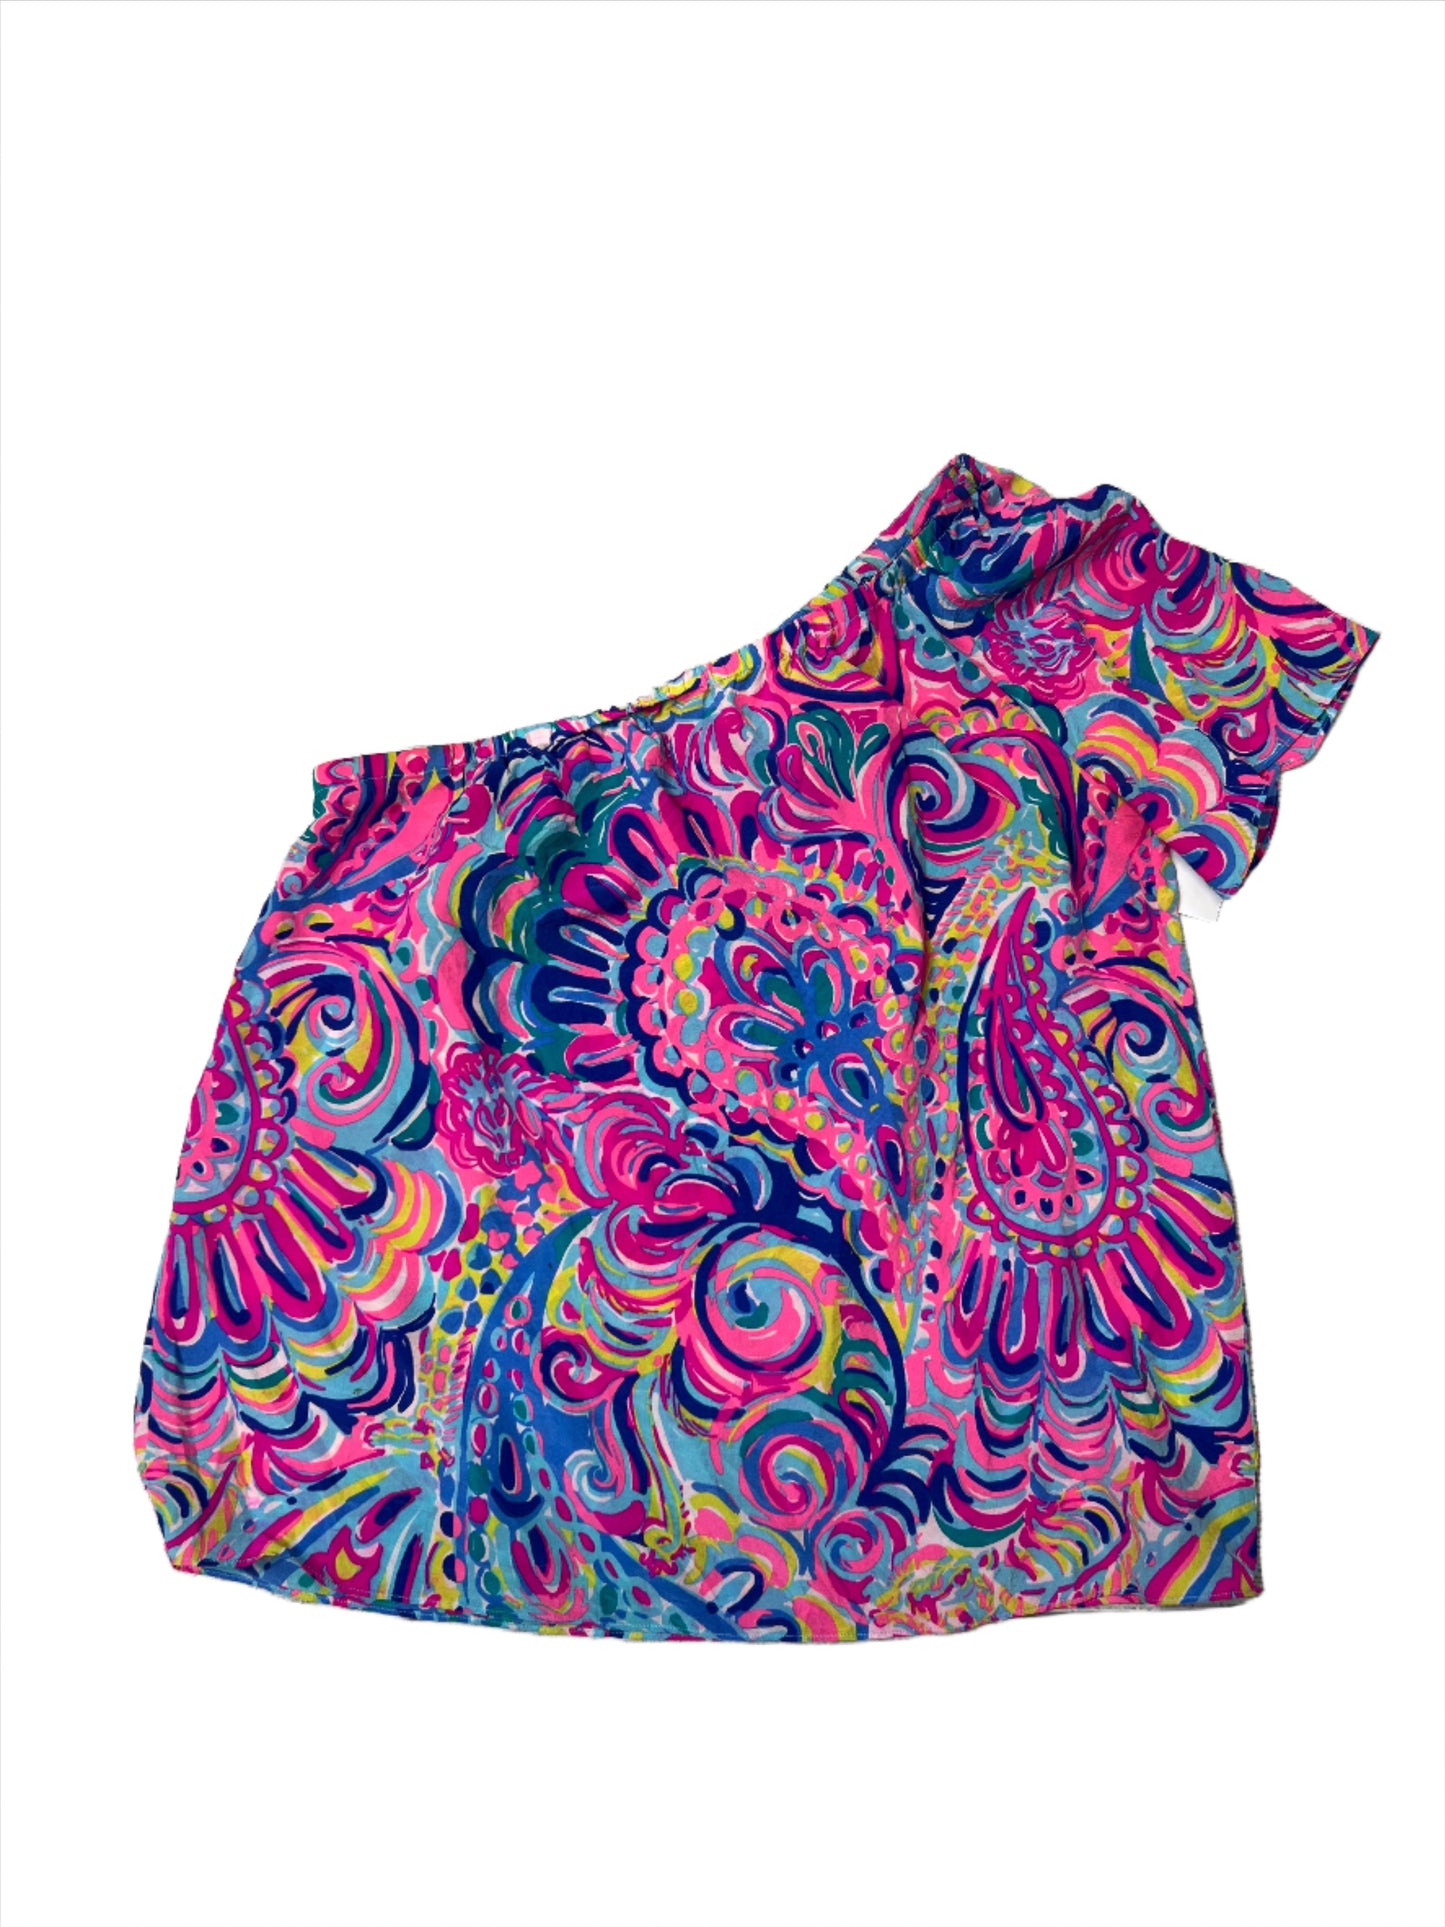 Multi-Colored Top Short Sleeve Lilly Pulitzer, Size Xs